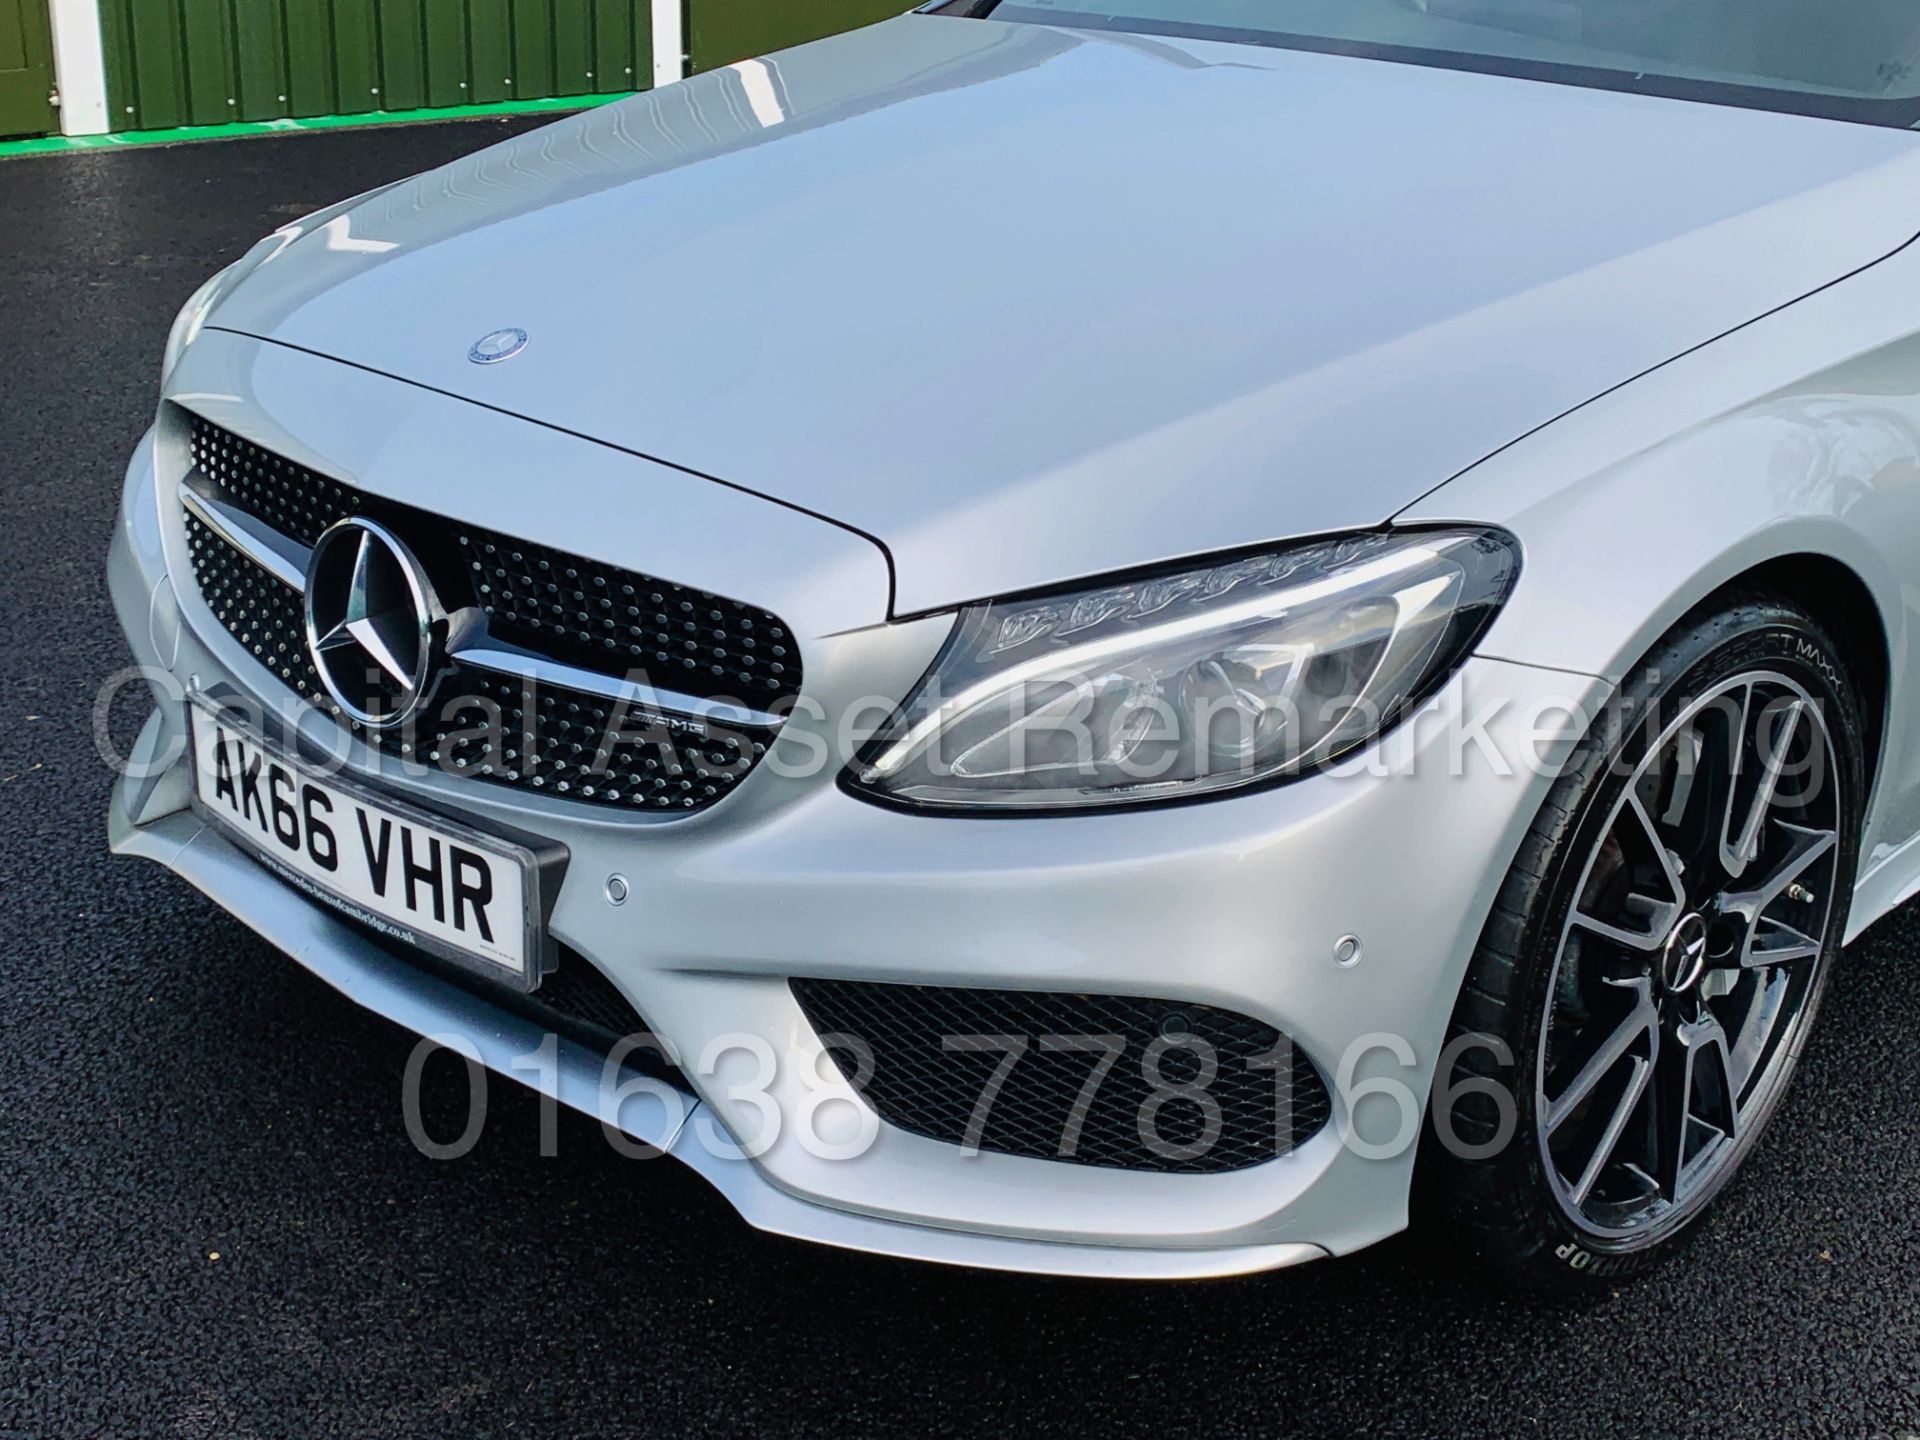 MERCEDES-BENZ C43 AMG *PREMIUM 4 MATIC* COUPE (2017) '9-G AUTO - LEATHER - SAT NAV' **FULLY LOADED** - Image 22 of 67